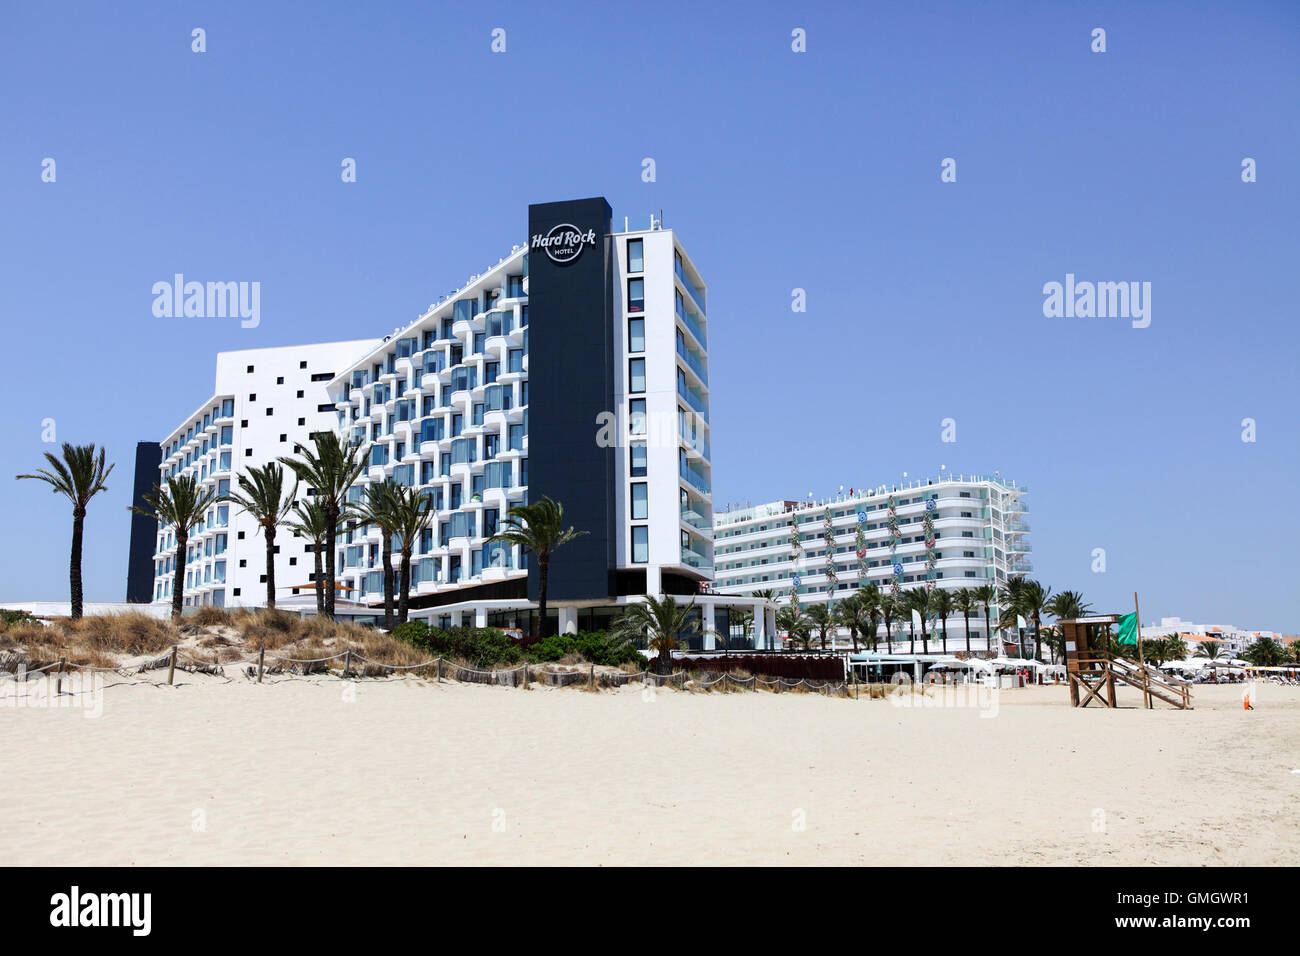 The Hard Rock Hotel and The Ushuaia Hotel at Platja D'en Bossa on the Spanish island of Ibiza. Viewed here from the beach. Stock Photo